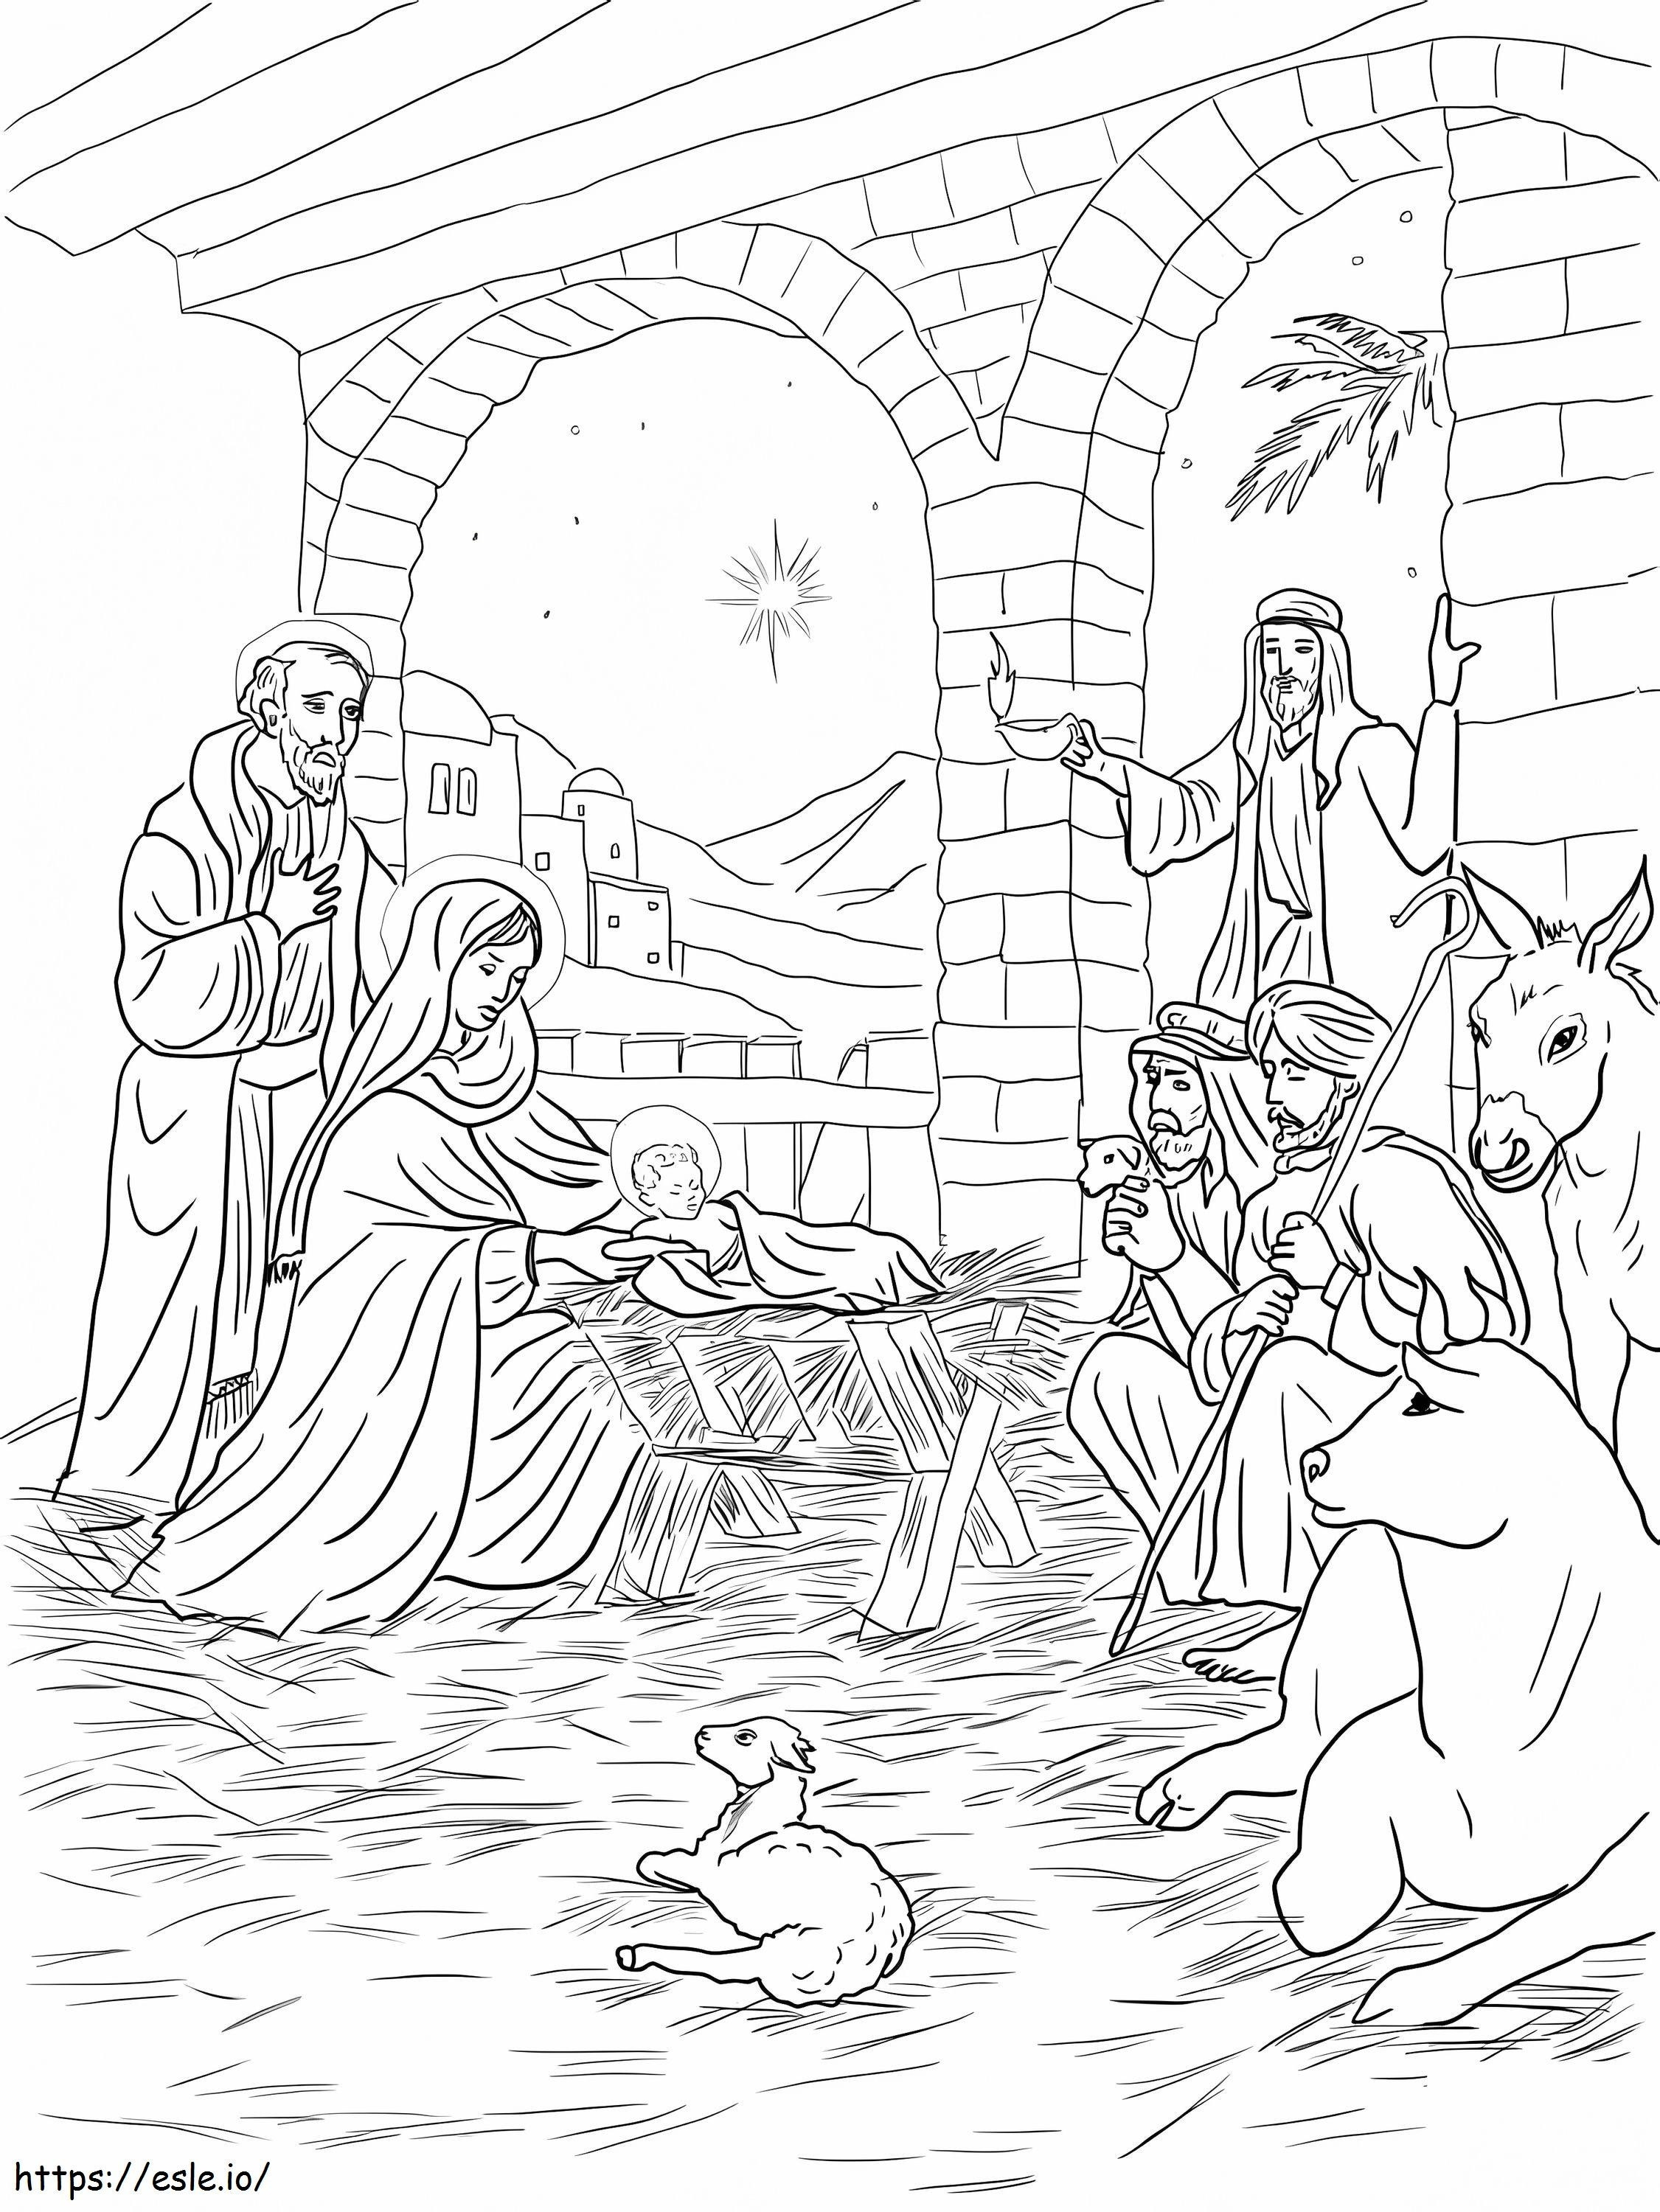 Shepherds Come To See Baby Jesus coloring page